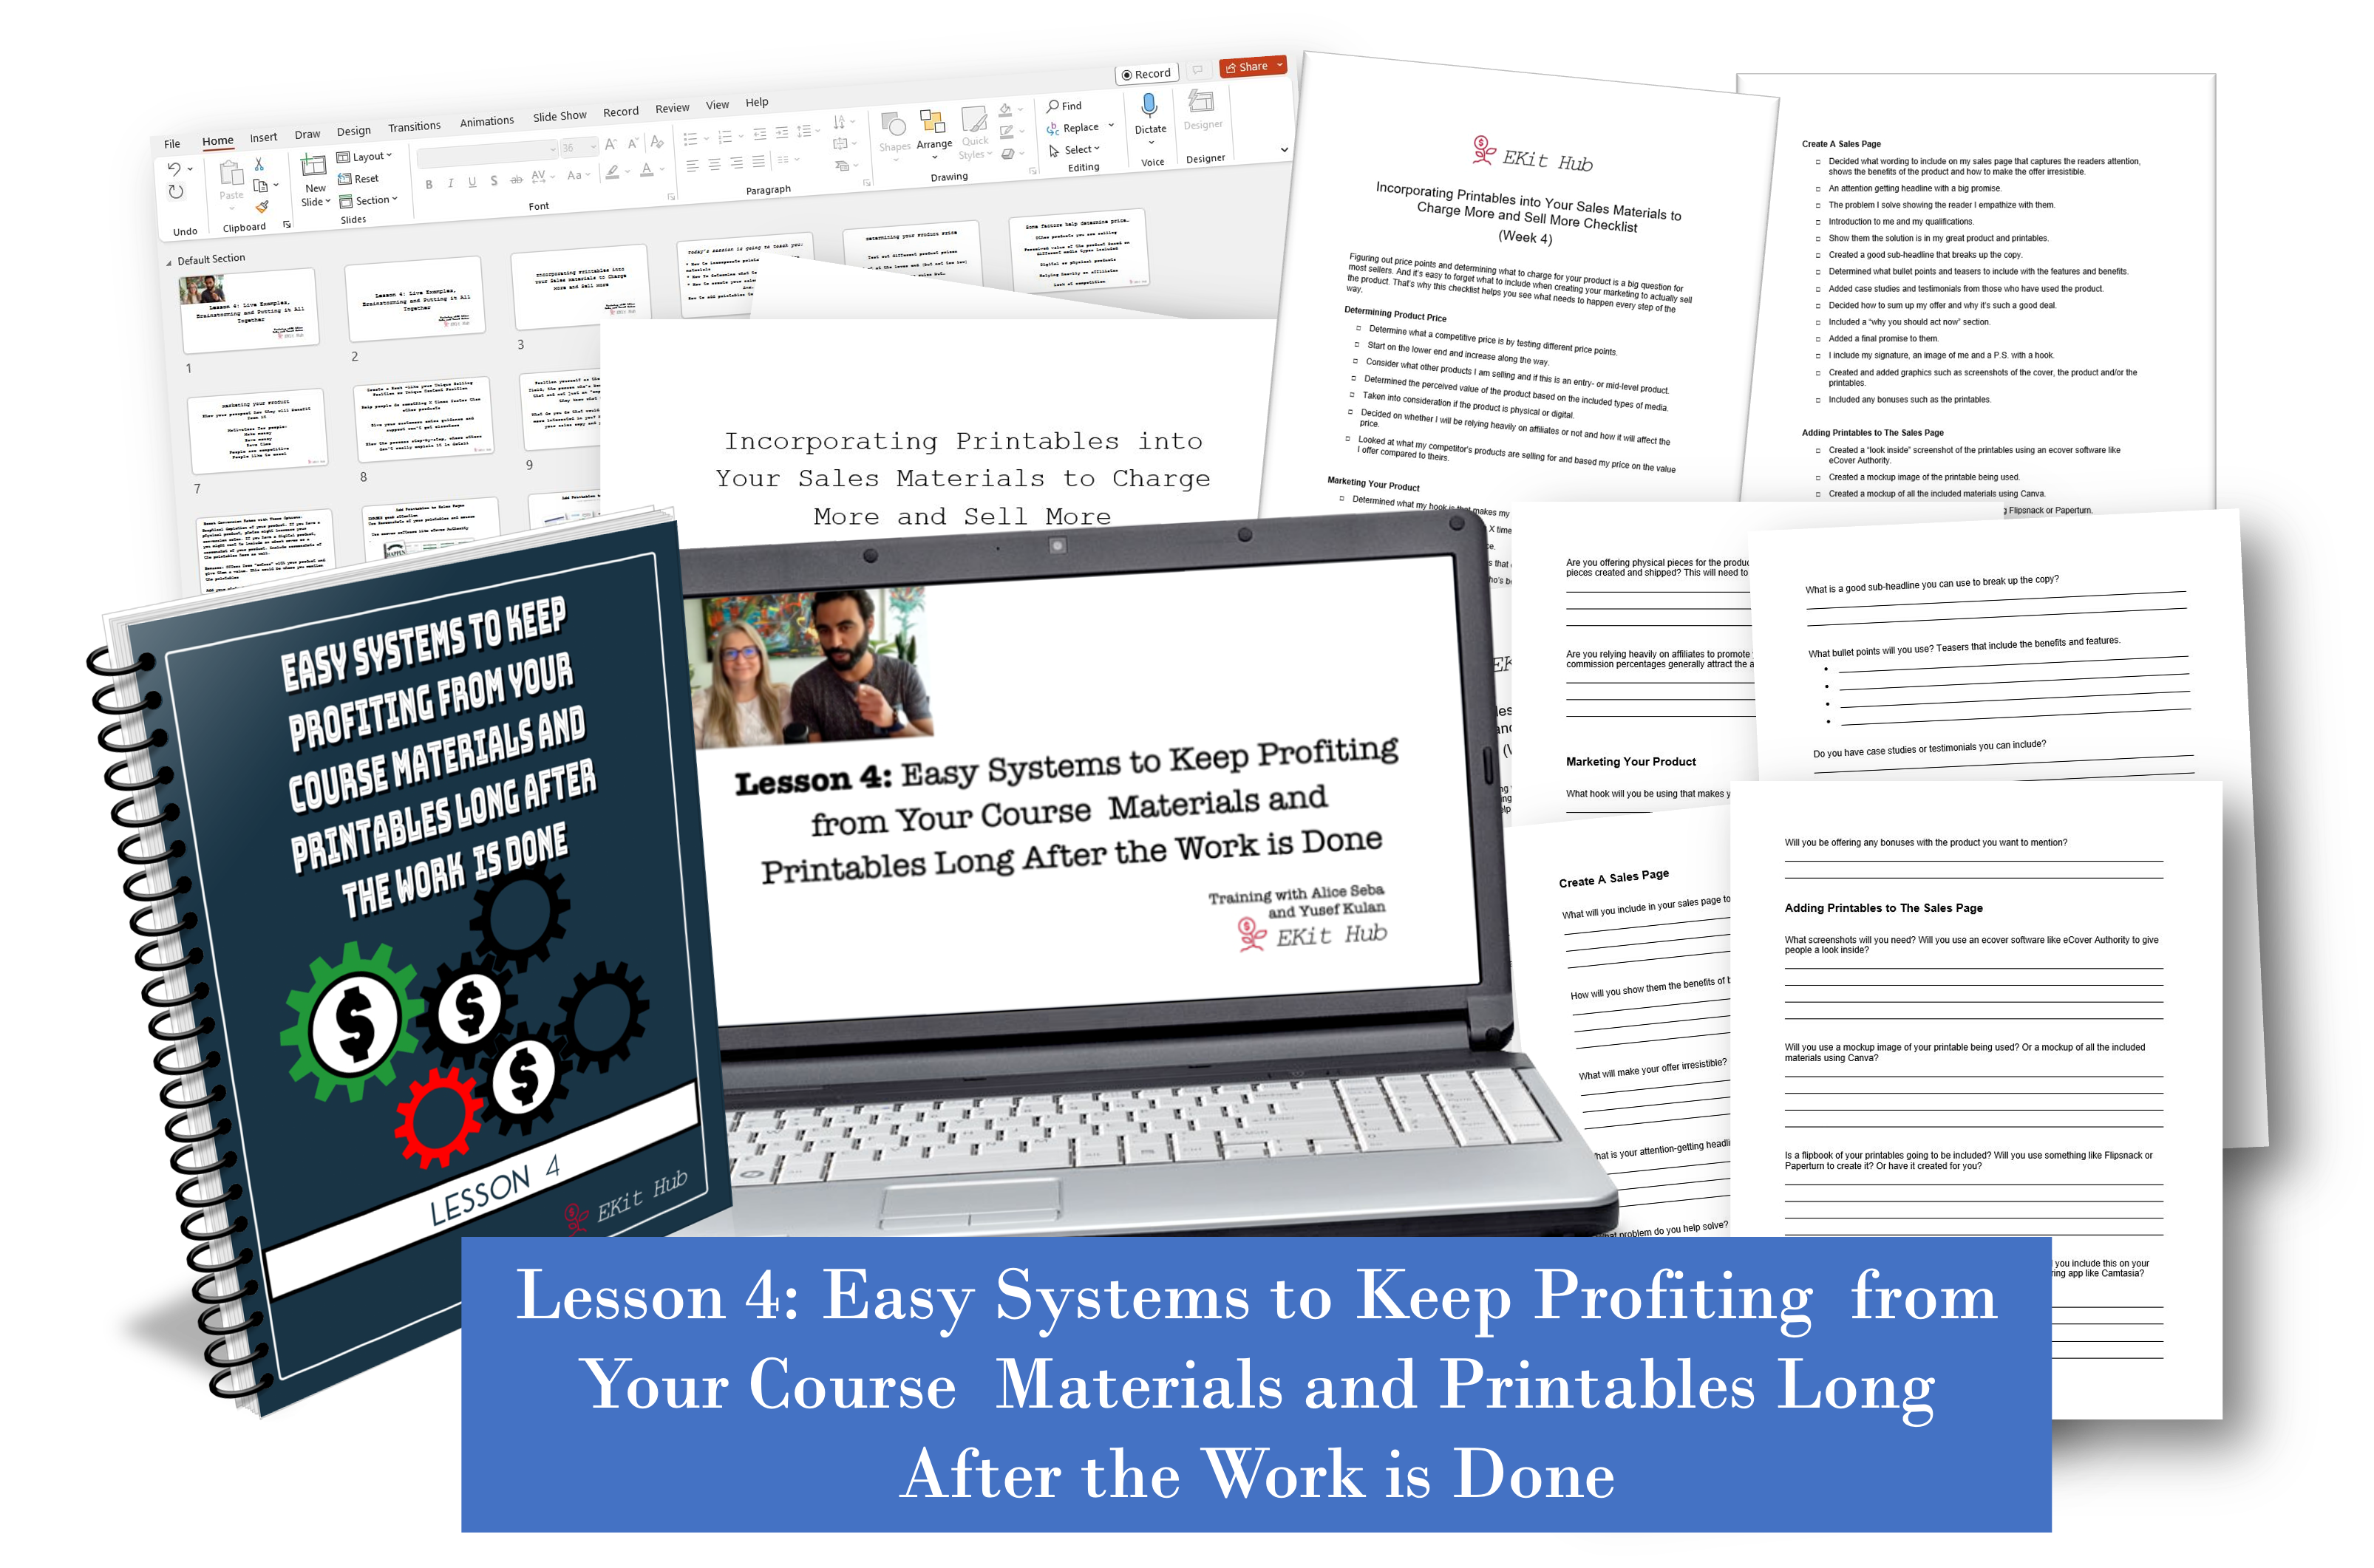 Lesson 4: Easy Systems to Keep Profiting  from Your Course  Materials and Printables Long After the Work is Done